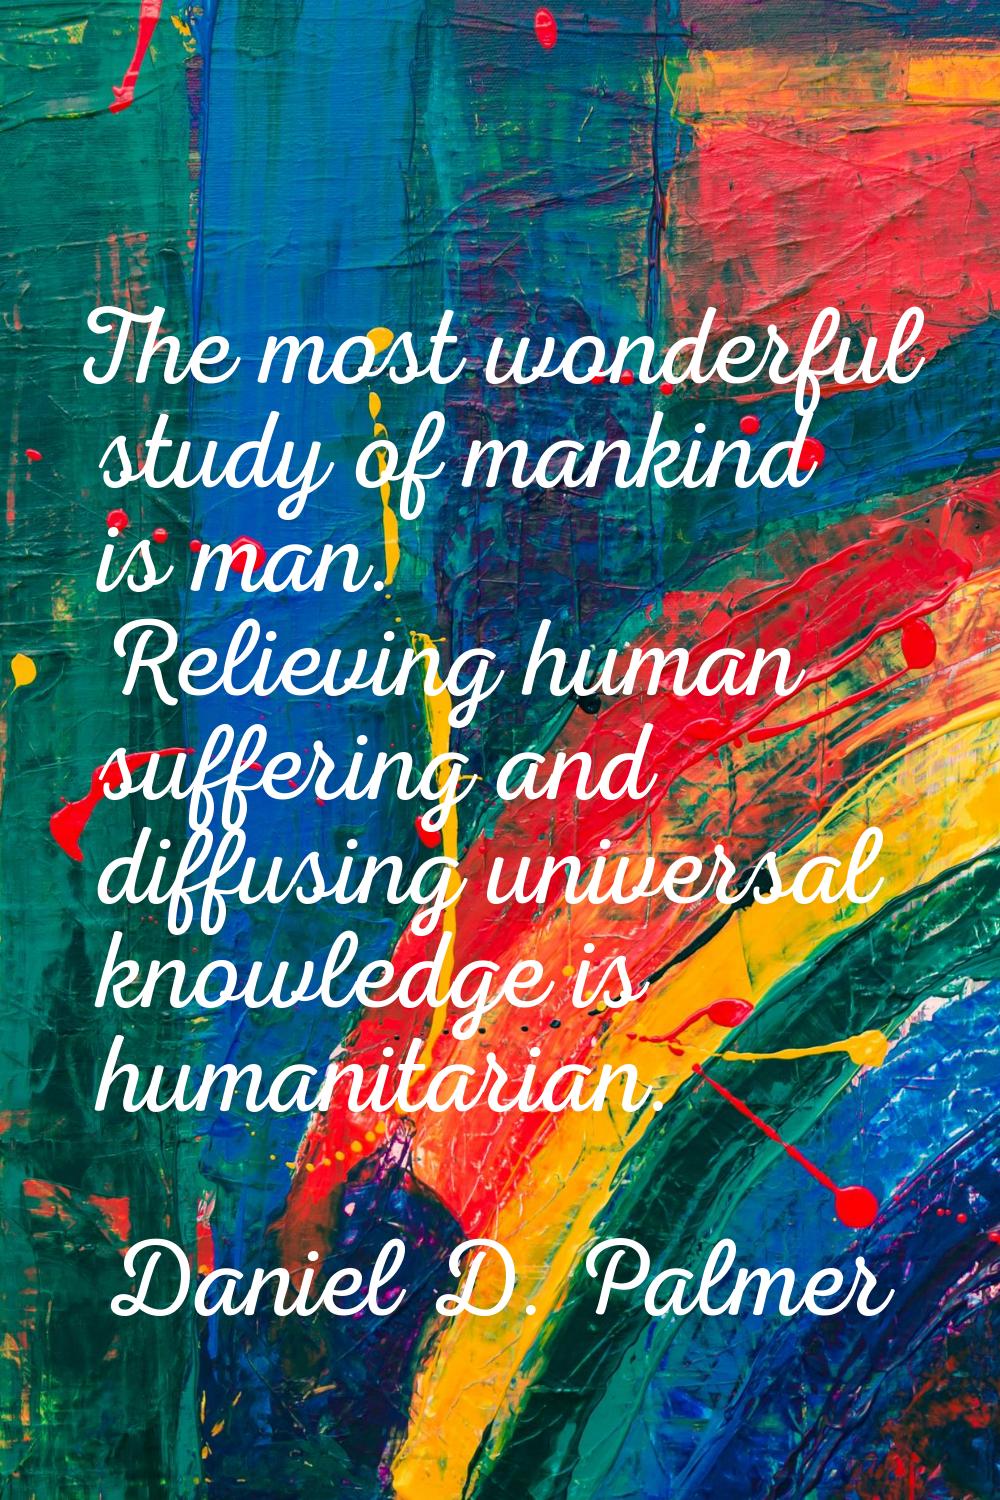 The most wonderful study of mankind is man. Relieving human suffering and diffusing universal knowl